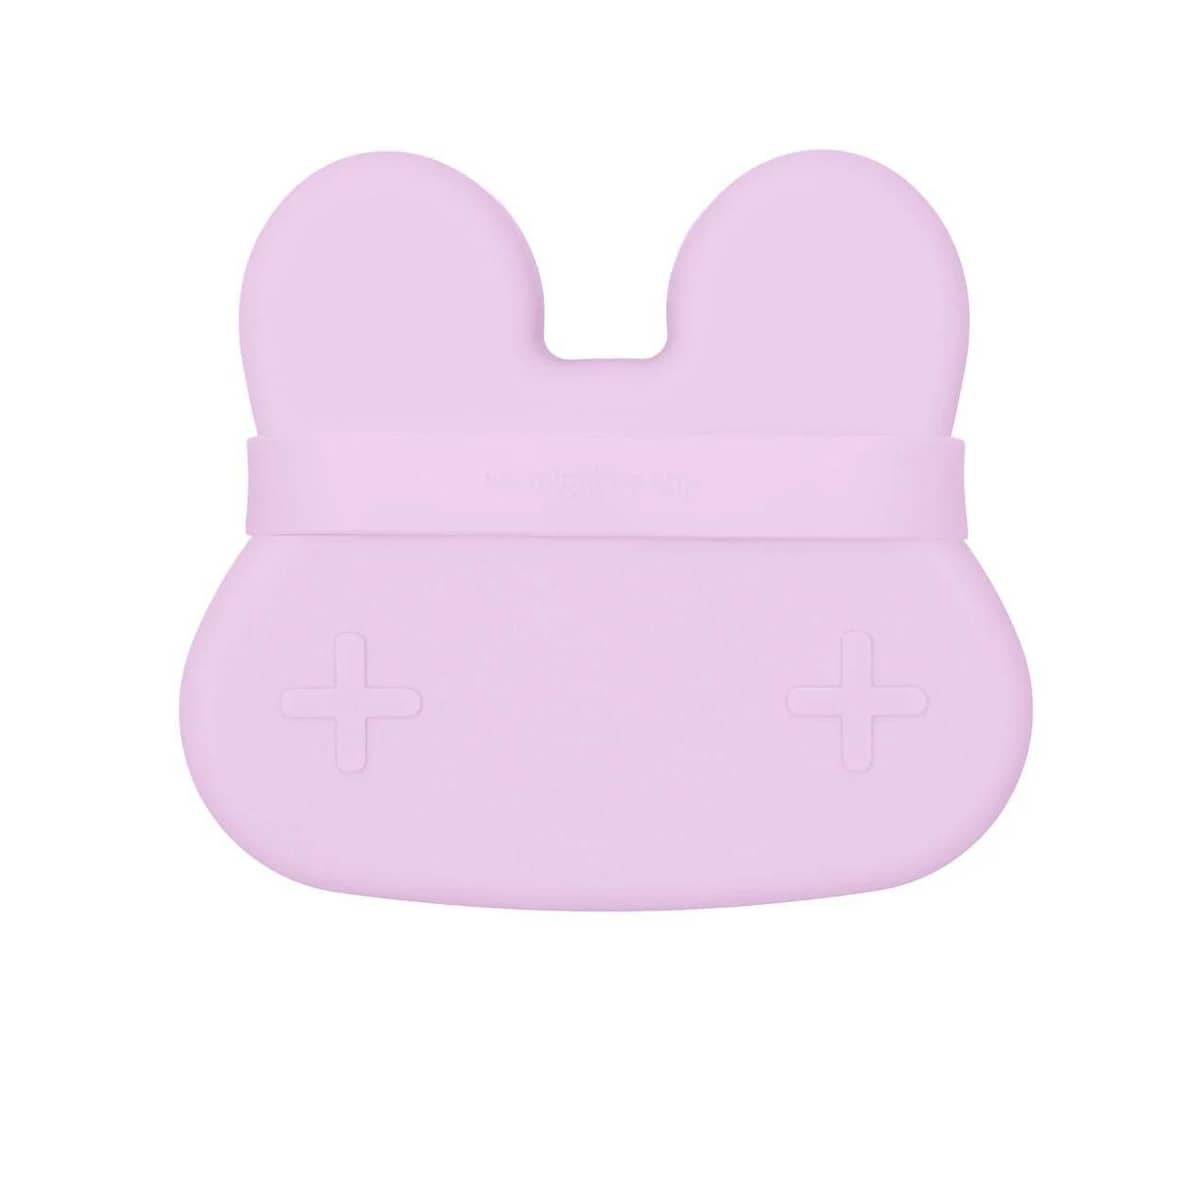 We Might Be Tiny Snackie Silicone Bowl + Plate - Bunny - Lilac